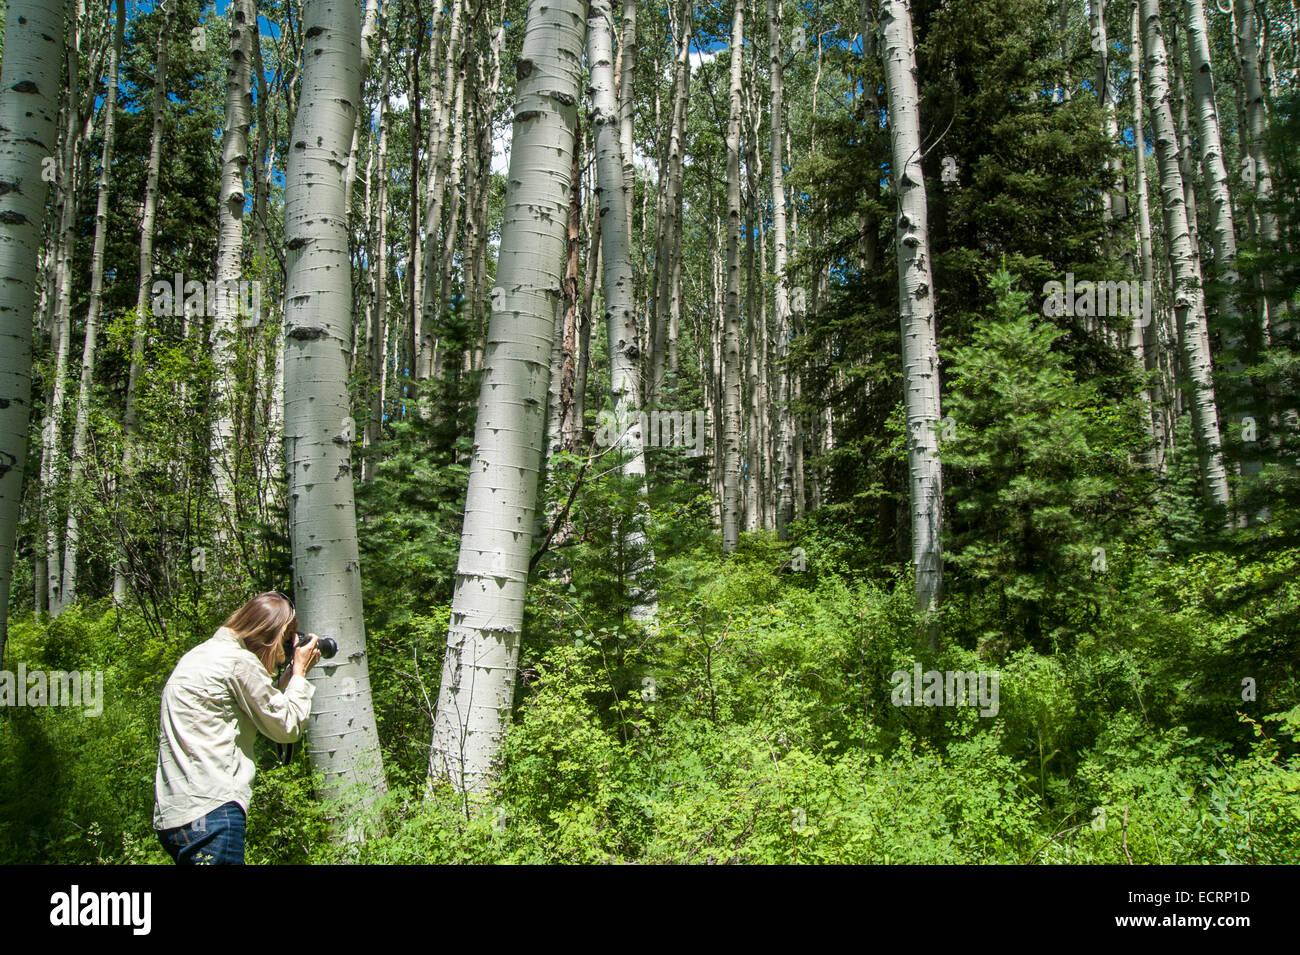 Young woman photographing Aspen Tree forest Banque D'Images